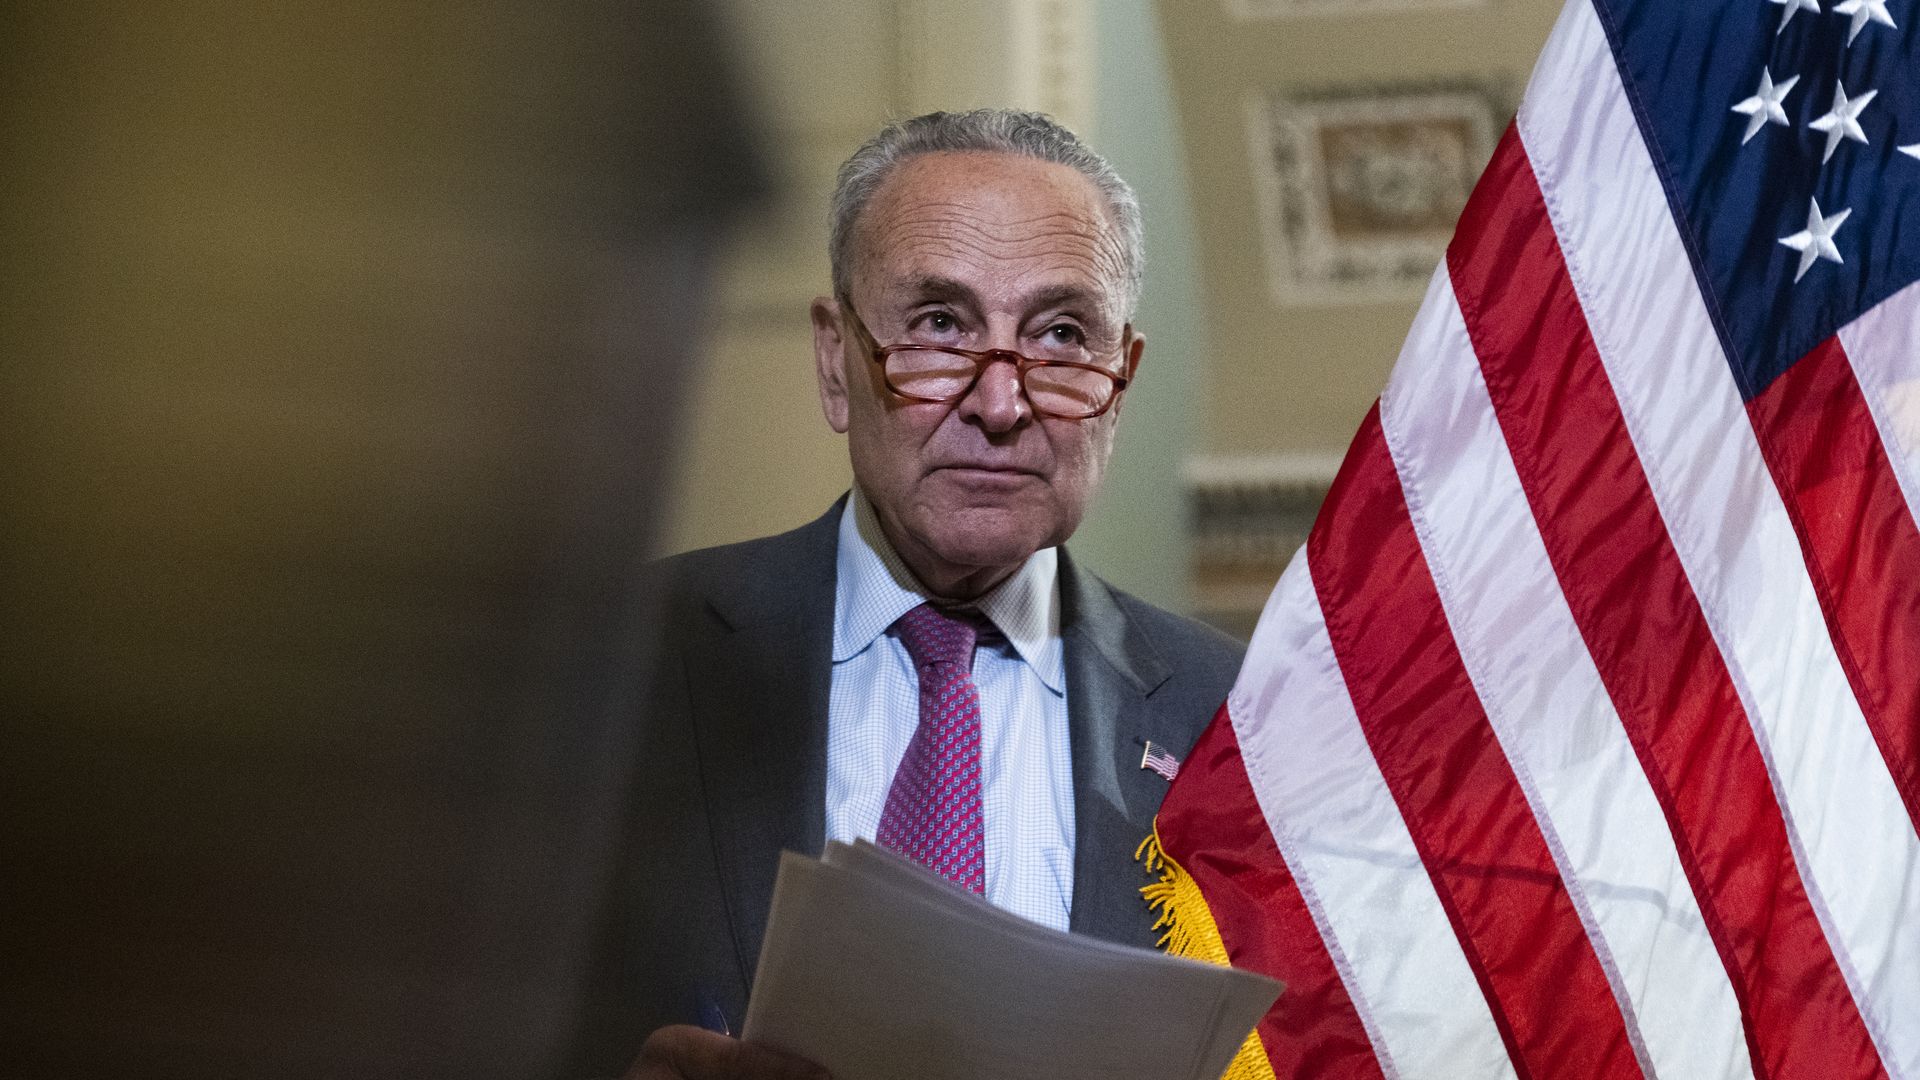 enate Majority Leader Charles Schumer, D-N.Y., conducts a news conference after senate luncheons in the U.S. Capitol, on Tuesday, May 24, 2022.